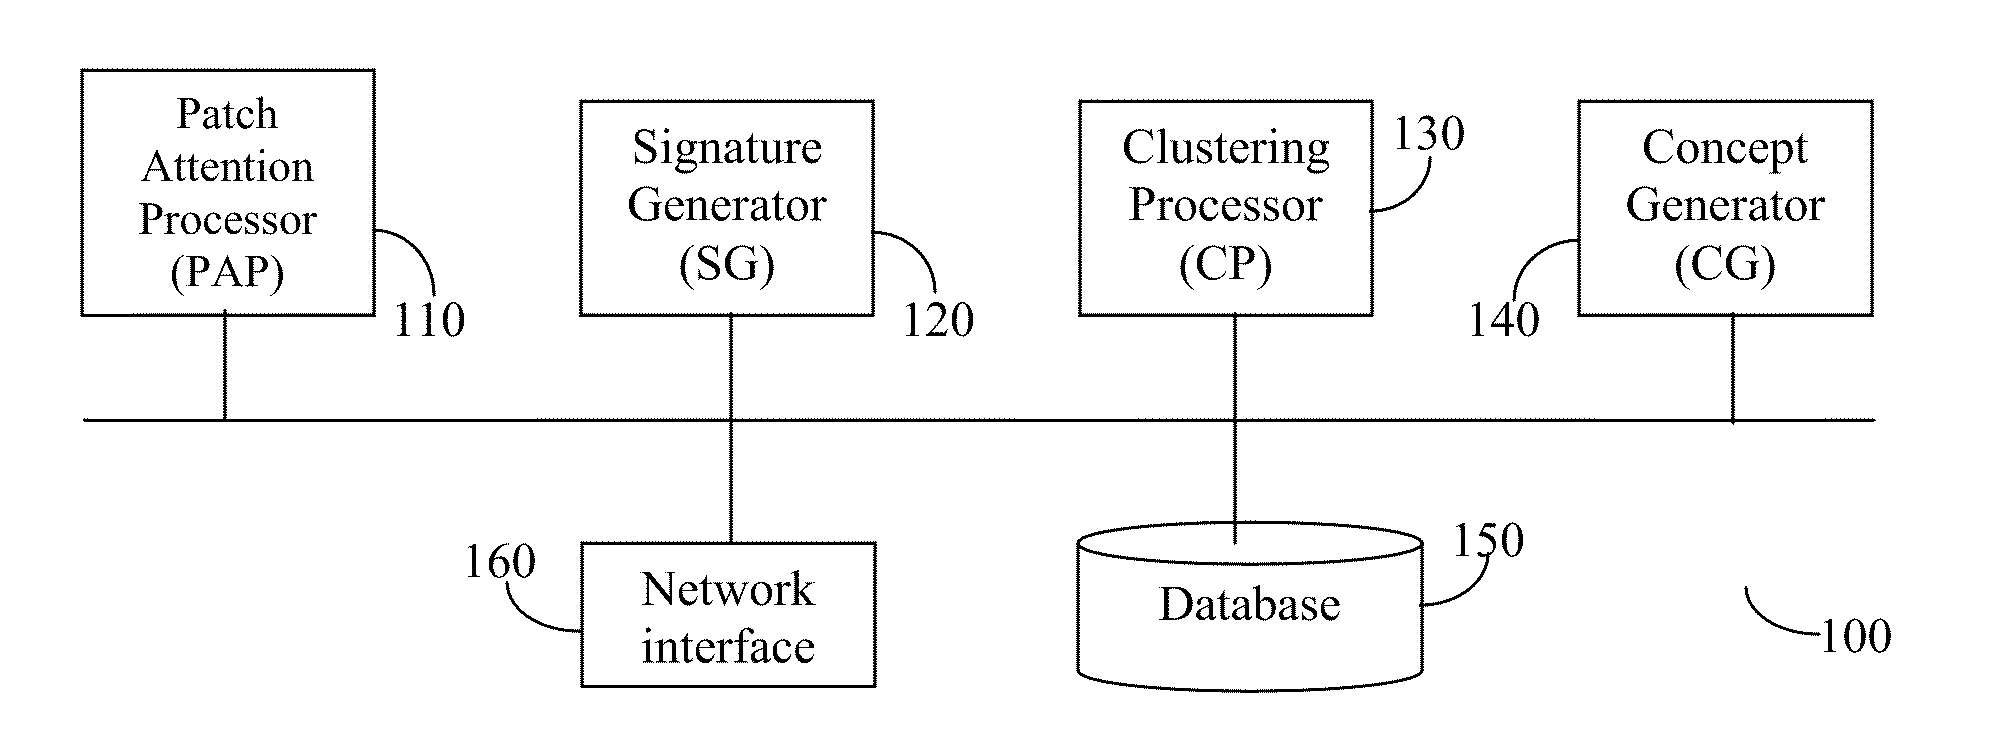 System and Methods Thereof for Generation of Searchable Structures Respective of Multimedia Data Content